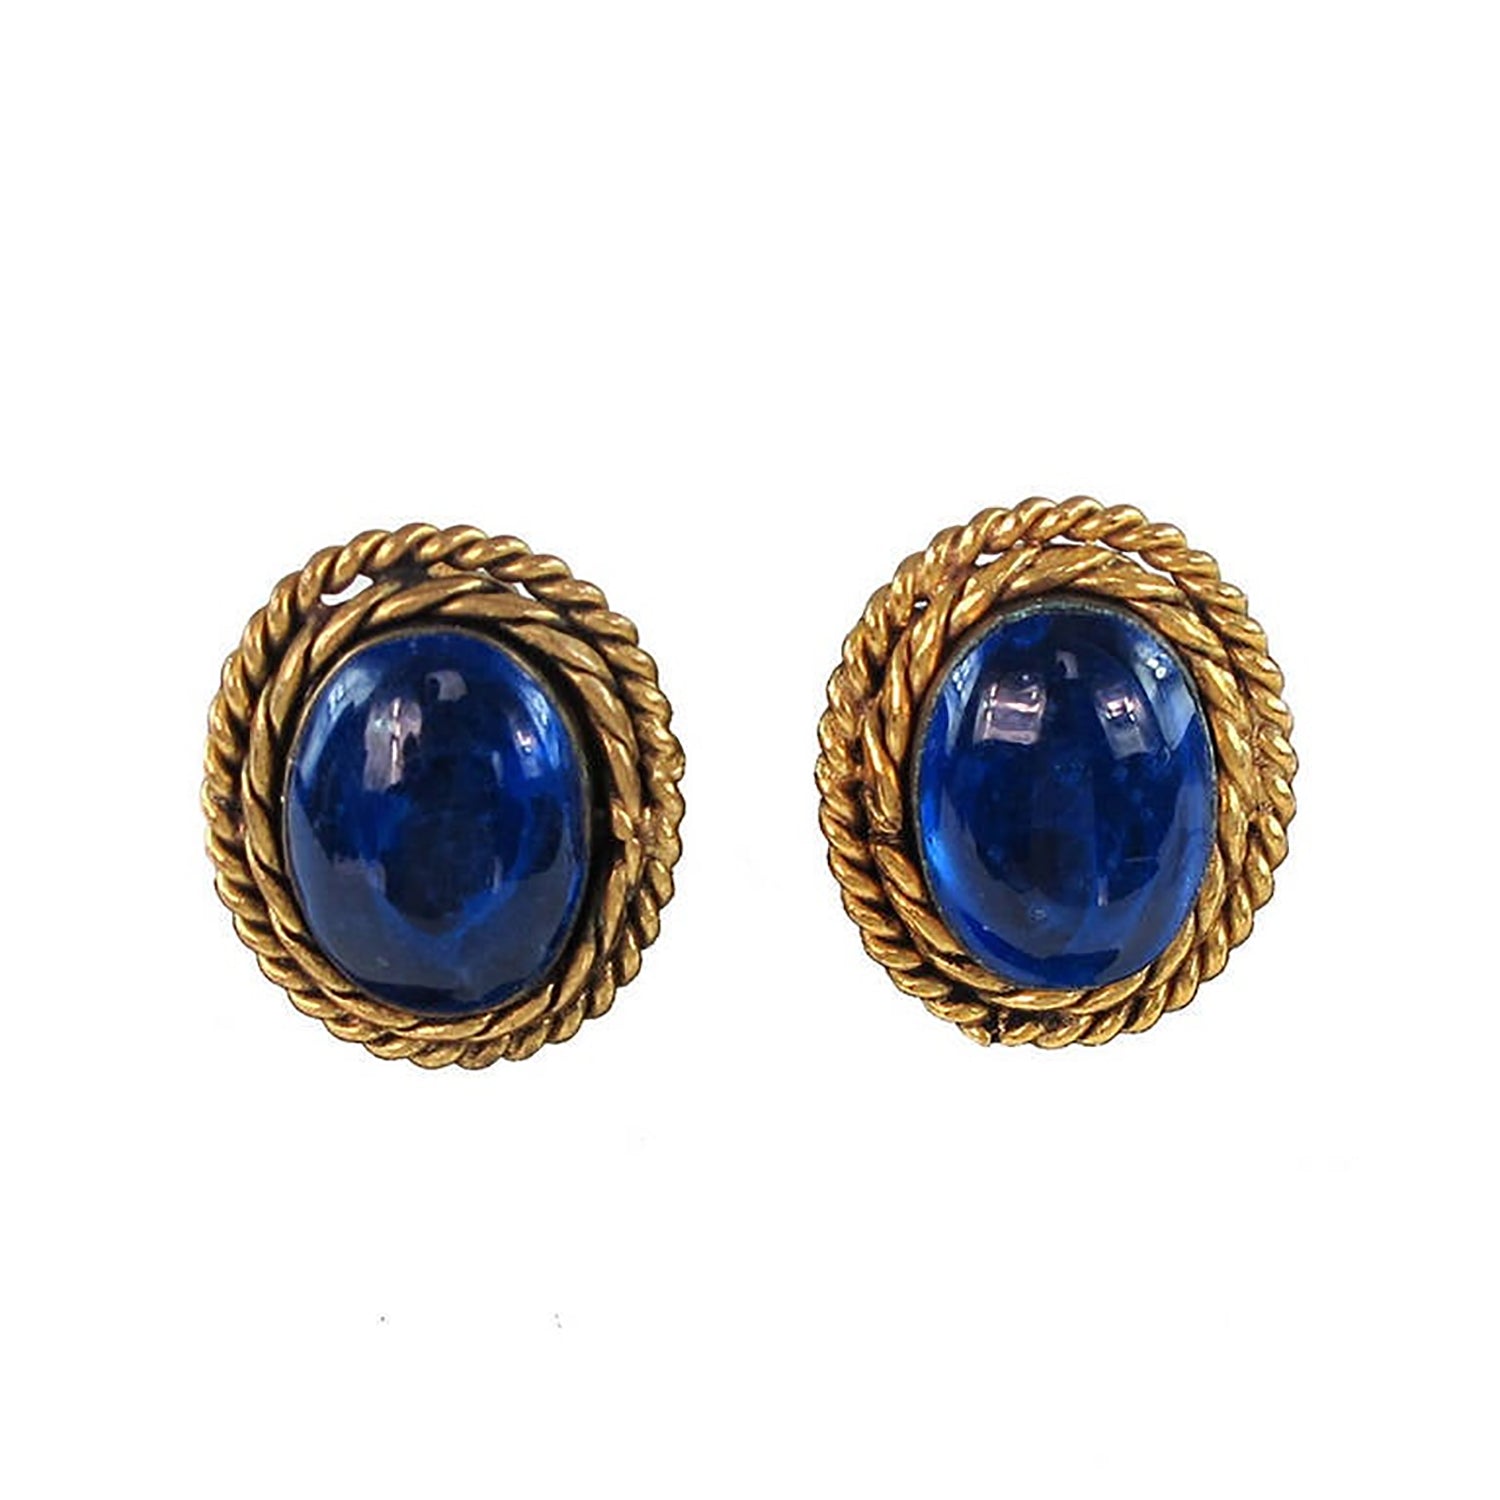 SOLD Vintage Chanel Gripoix Earrings Blue and Gold with Rope Twist